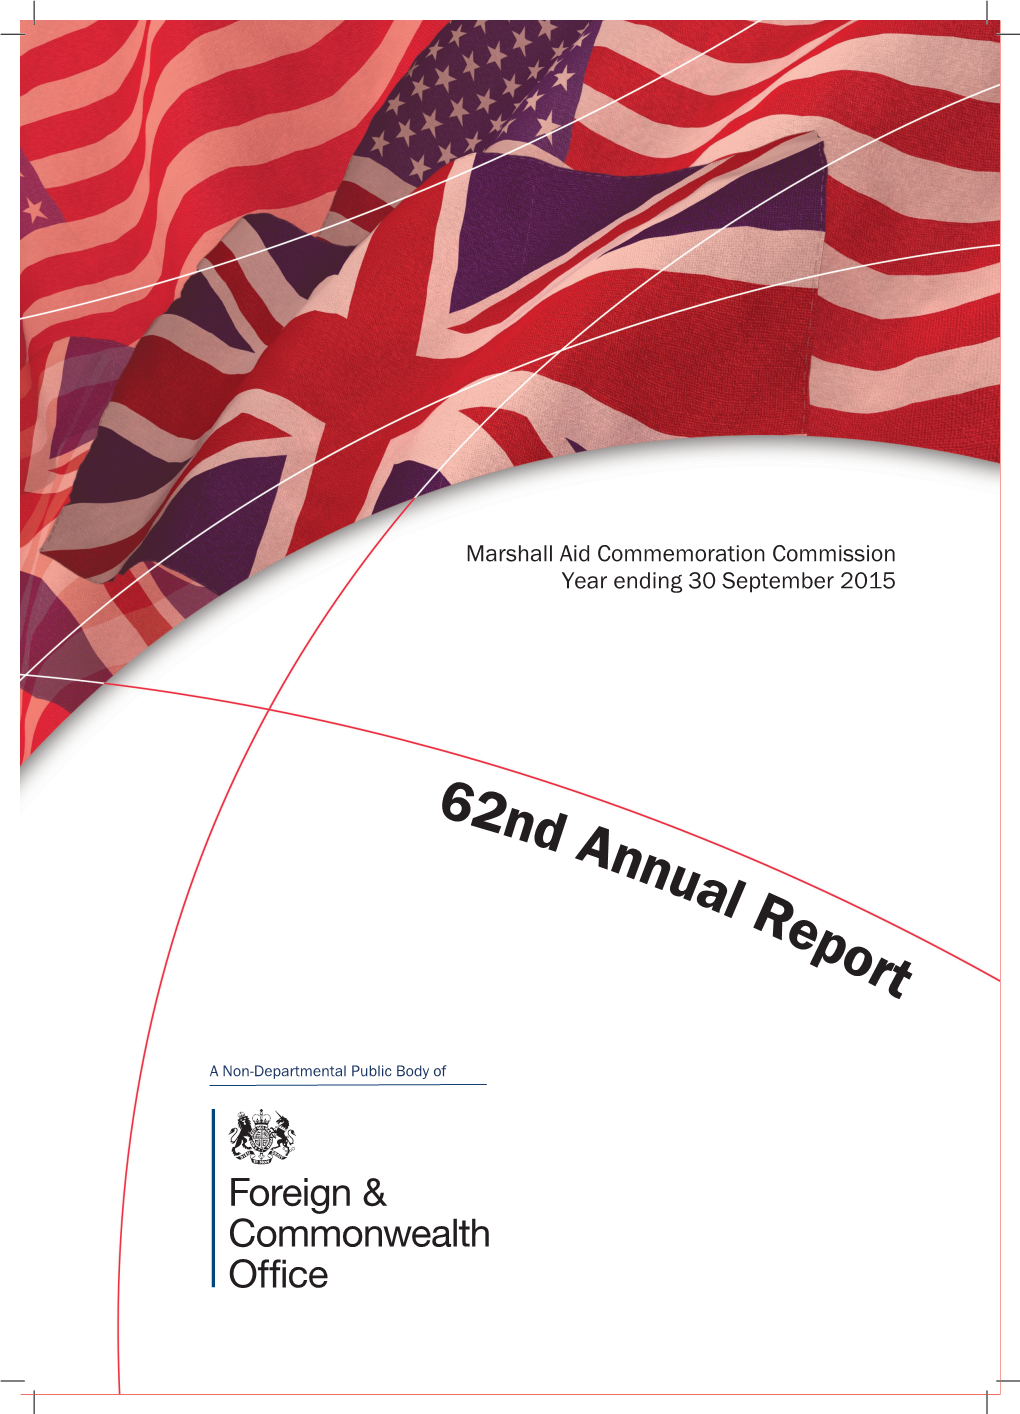 Sixty Second Annual Report of the Marshall Aid Commemoration